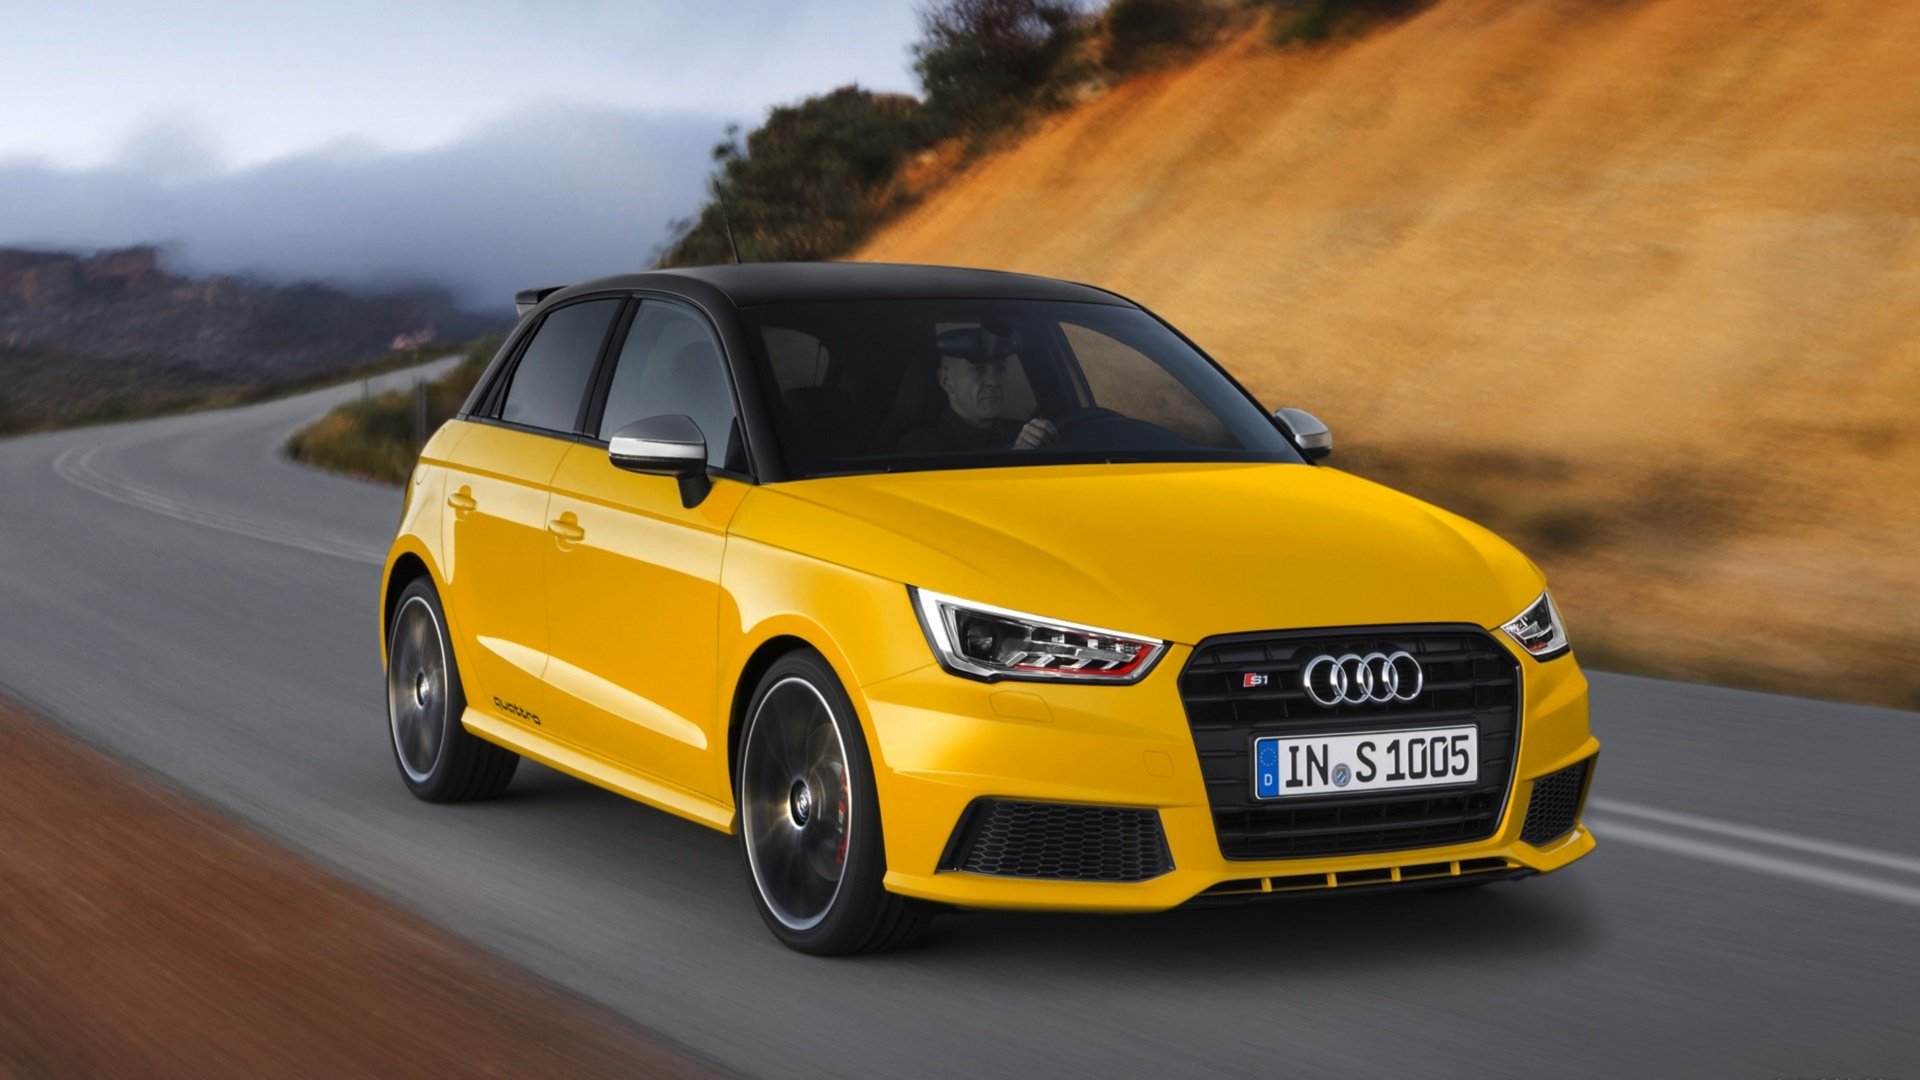 20+ Audi S1 Sportback HD Wallpapers and Backgrounds